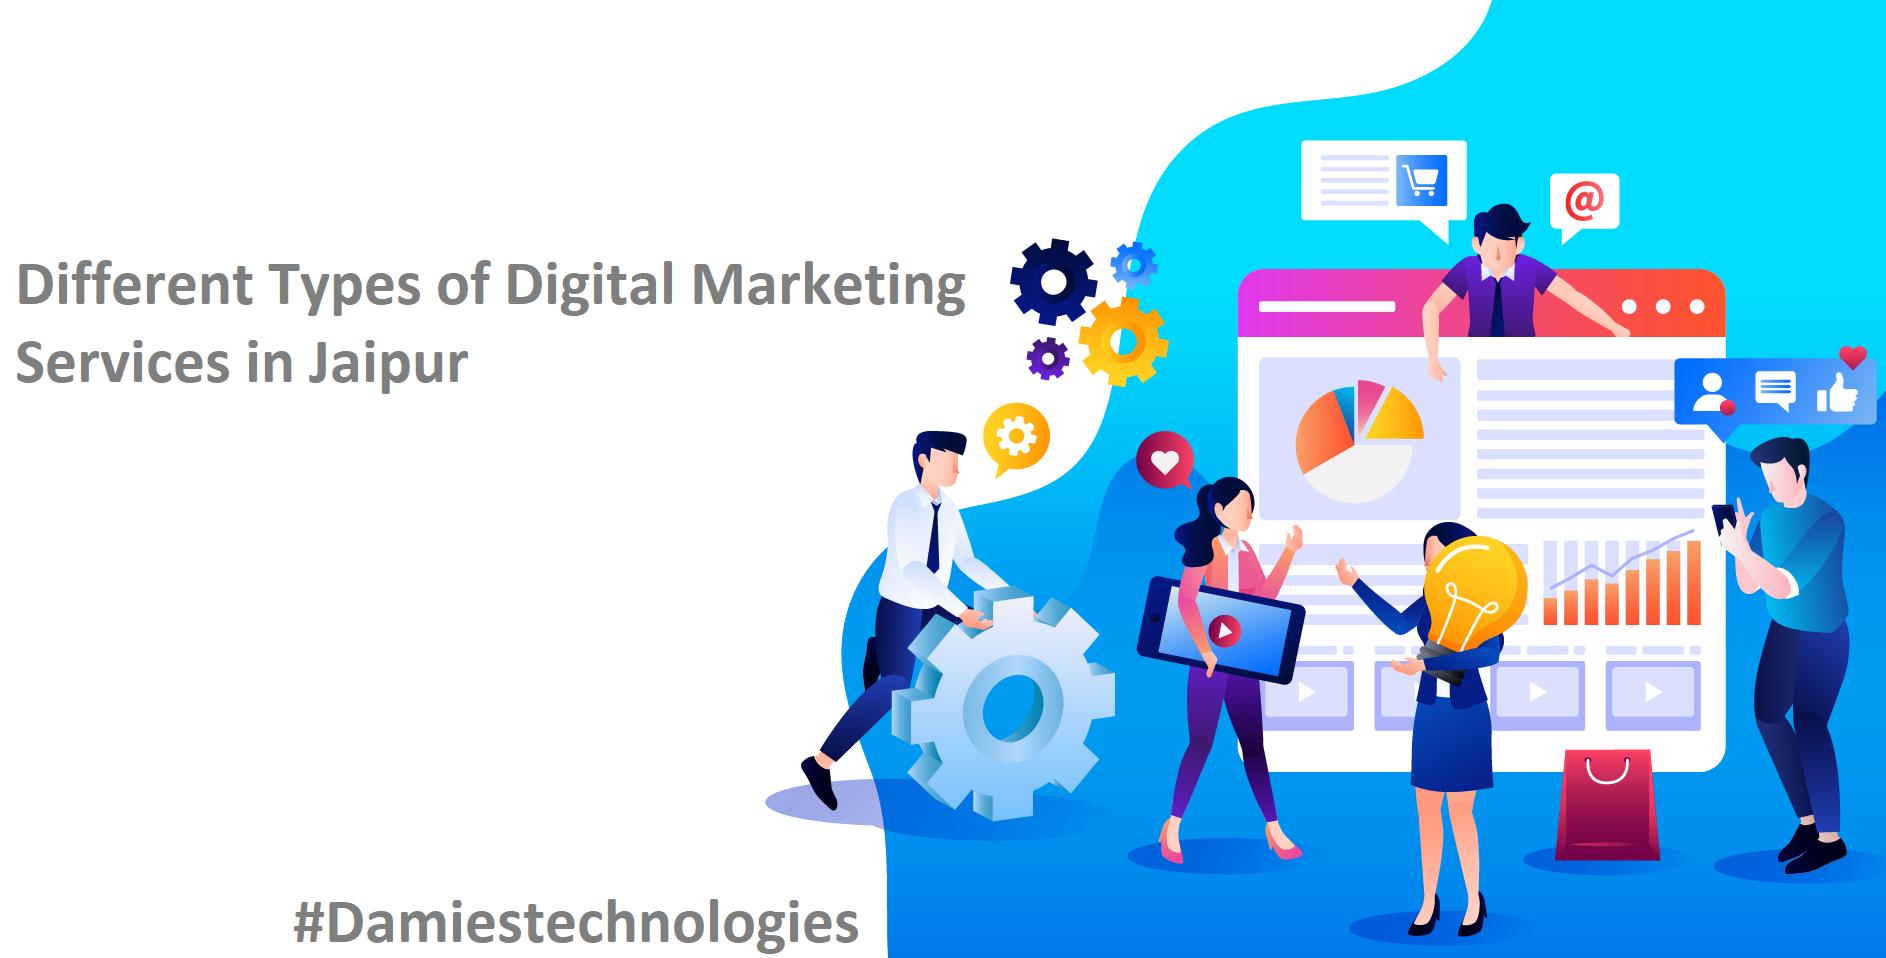 Different Types of Digital Marketing Services in Jaipur